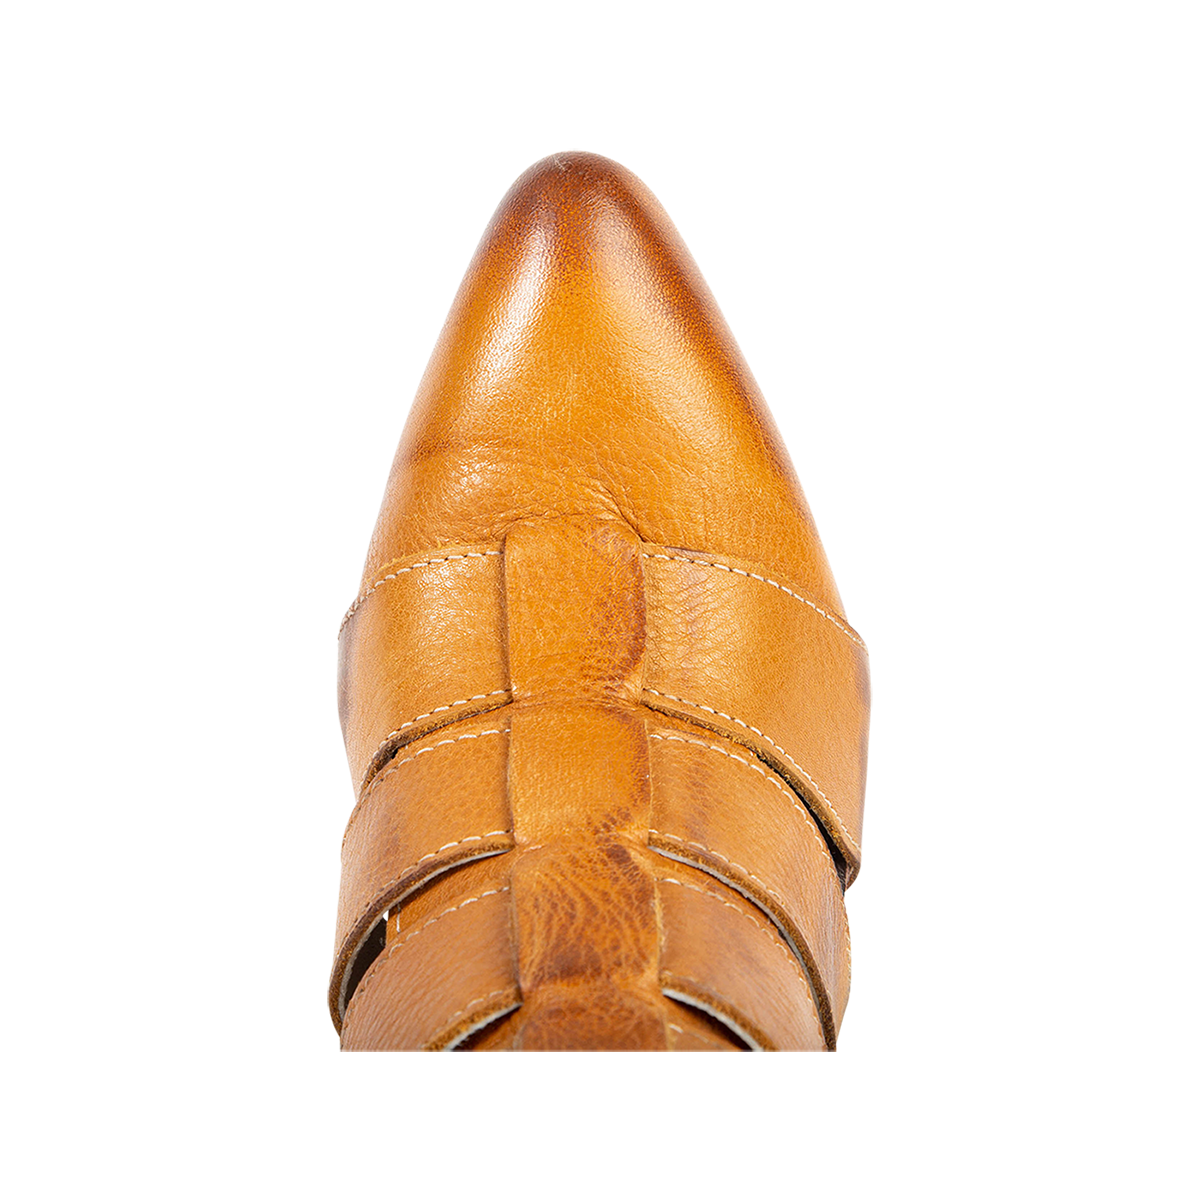 Top view showing pointed toe on FREEBIRD women's Jagger wheat leather pointed toe bootie